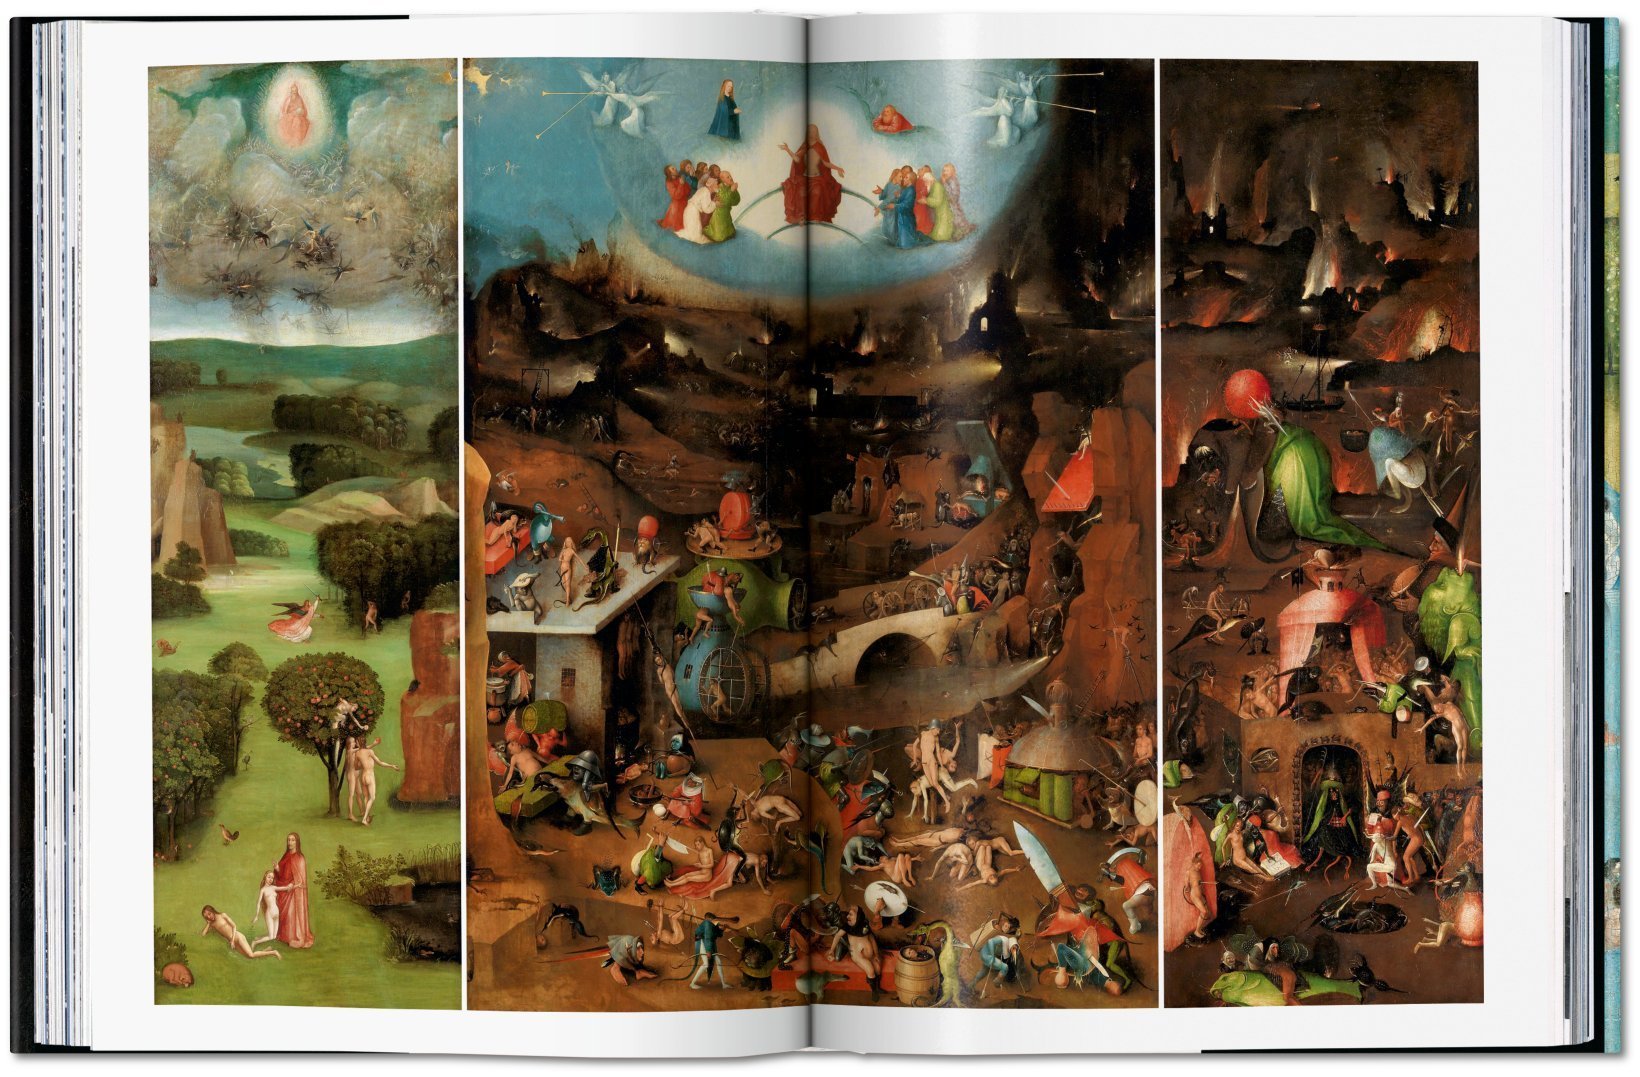 Artbook - Sách Tiếng Anh - Hieronymus Bosch. The Complete Works. 40th Ed.